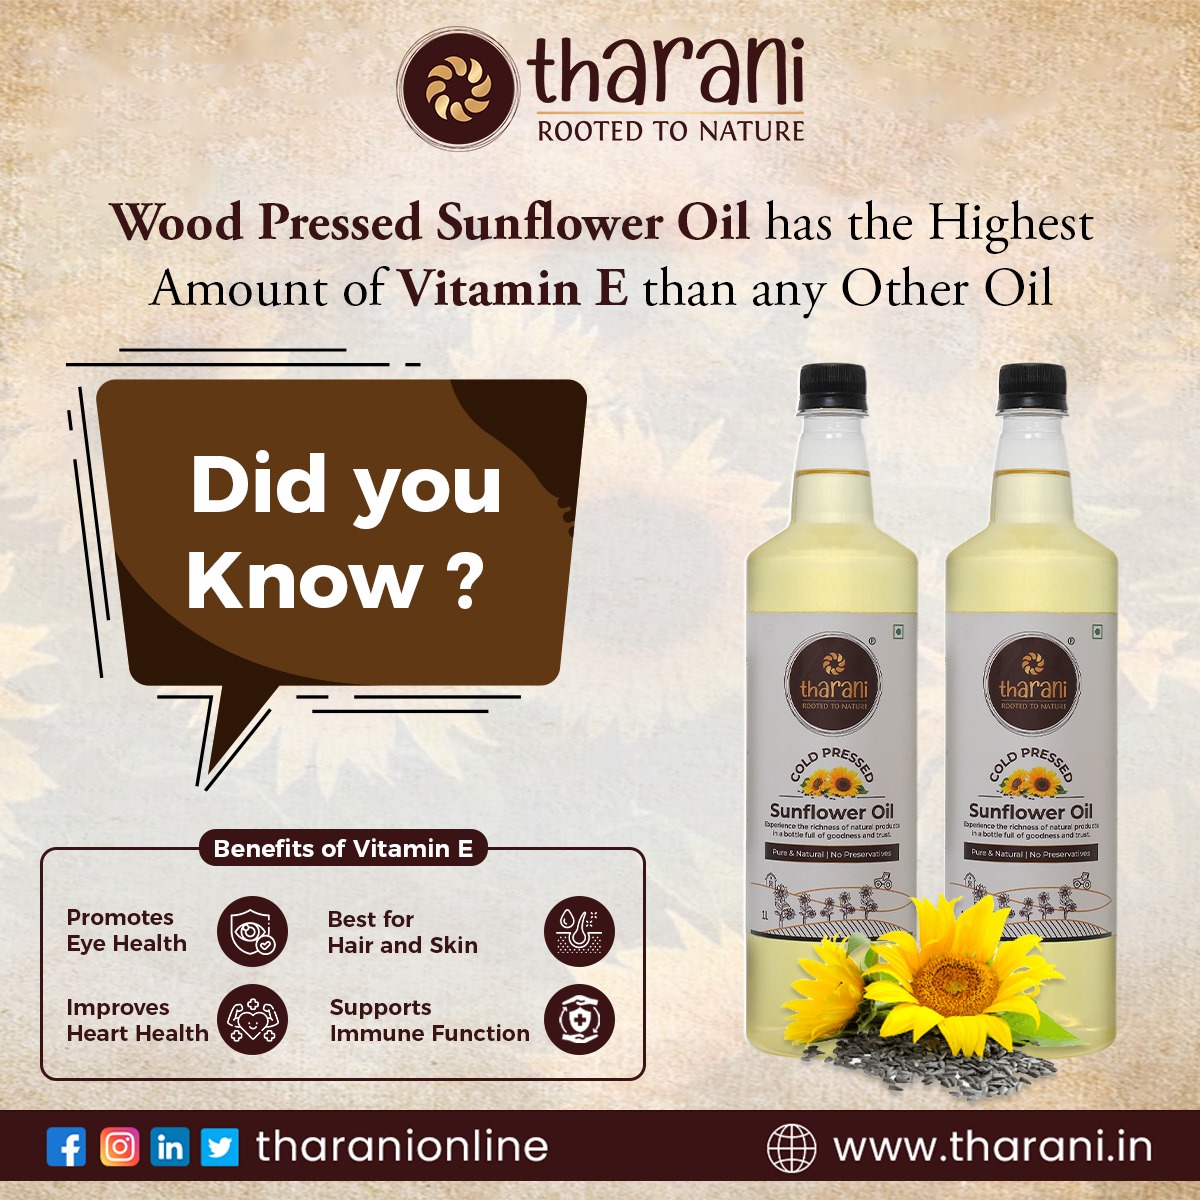 Add Tharani Wood Pressed Sunflower Oil to your daily routine for a boost in Vitamin E and a healthier lifestyle.
📷Order Online: bit.ly/3W00Ikr
📷Call us: 062817 82290
#tharani #tharanisunfloweroil #vitamine #sunfloweroil #healthyliving #eyehealth #haircare #skincare